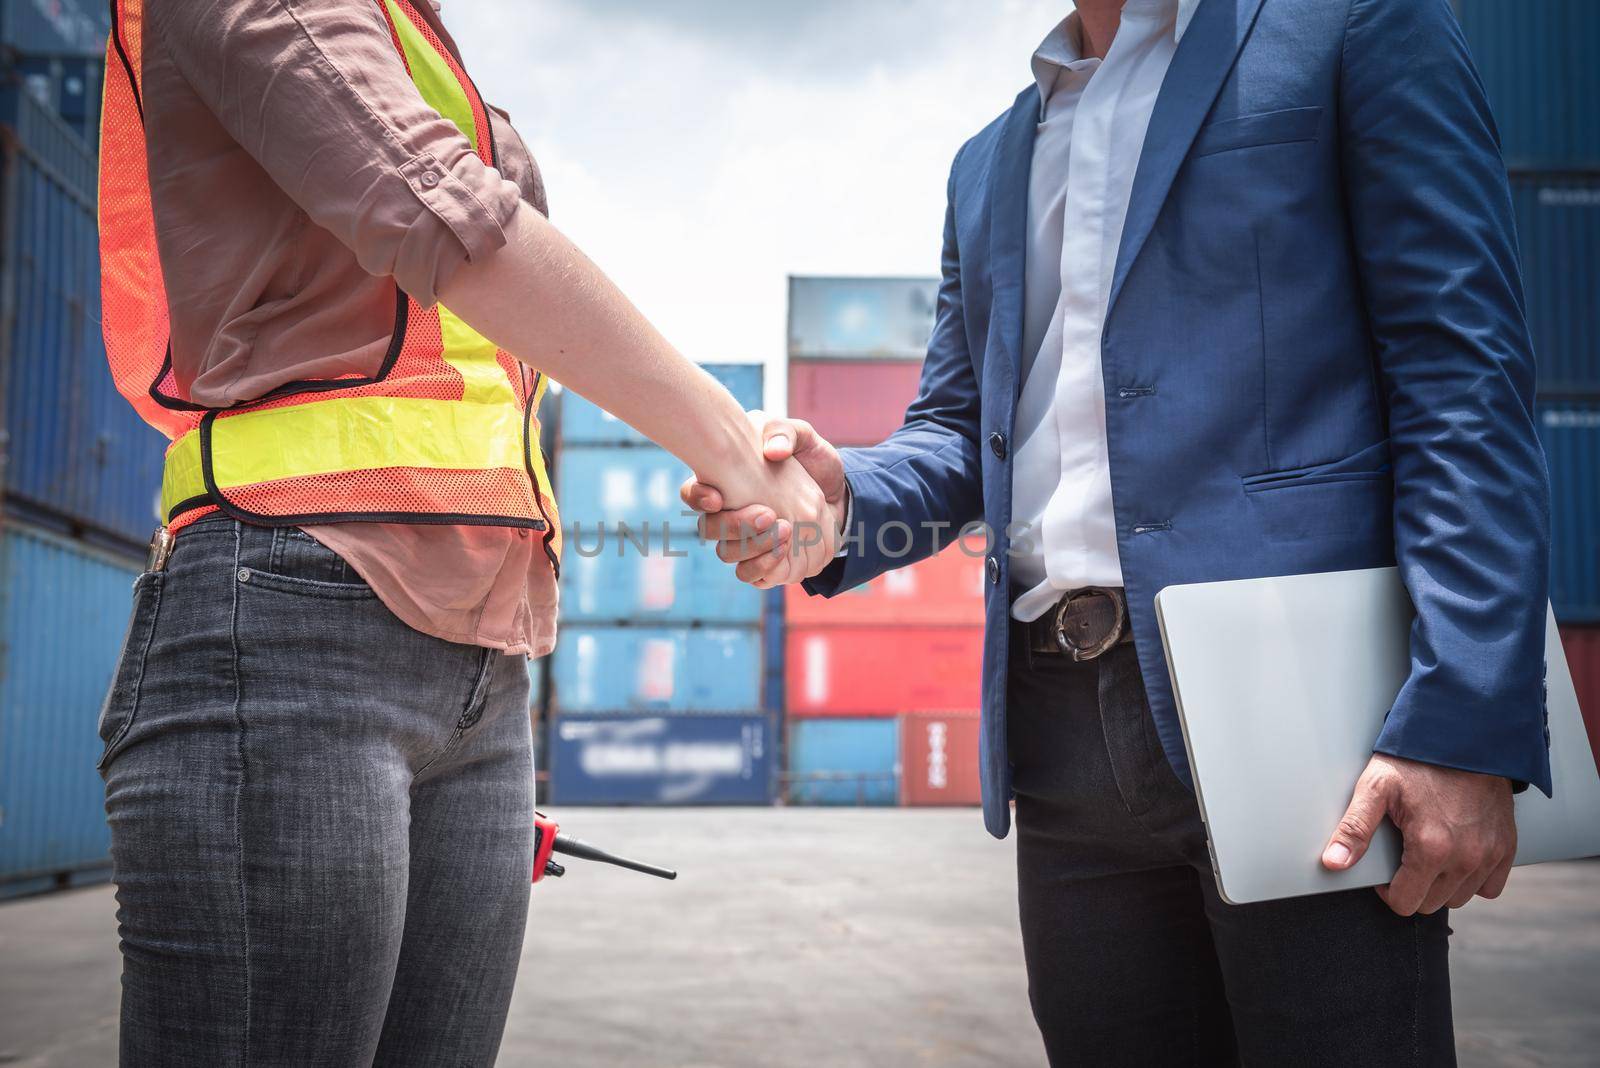 Businessman and Container Shipping Worker Handshake Together for Cooperation Shipment in Logistic Warehouse, Business Partnership Greeting Handshaking After Discussion Containers Transport Dealing. by MahaHeang245789